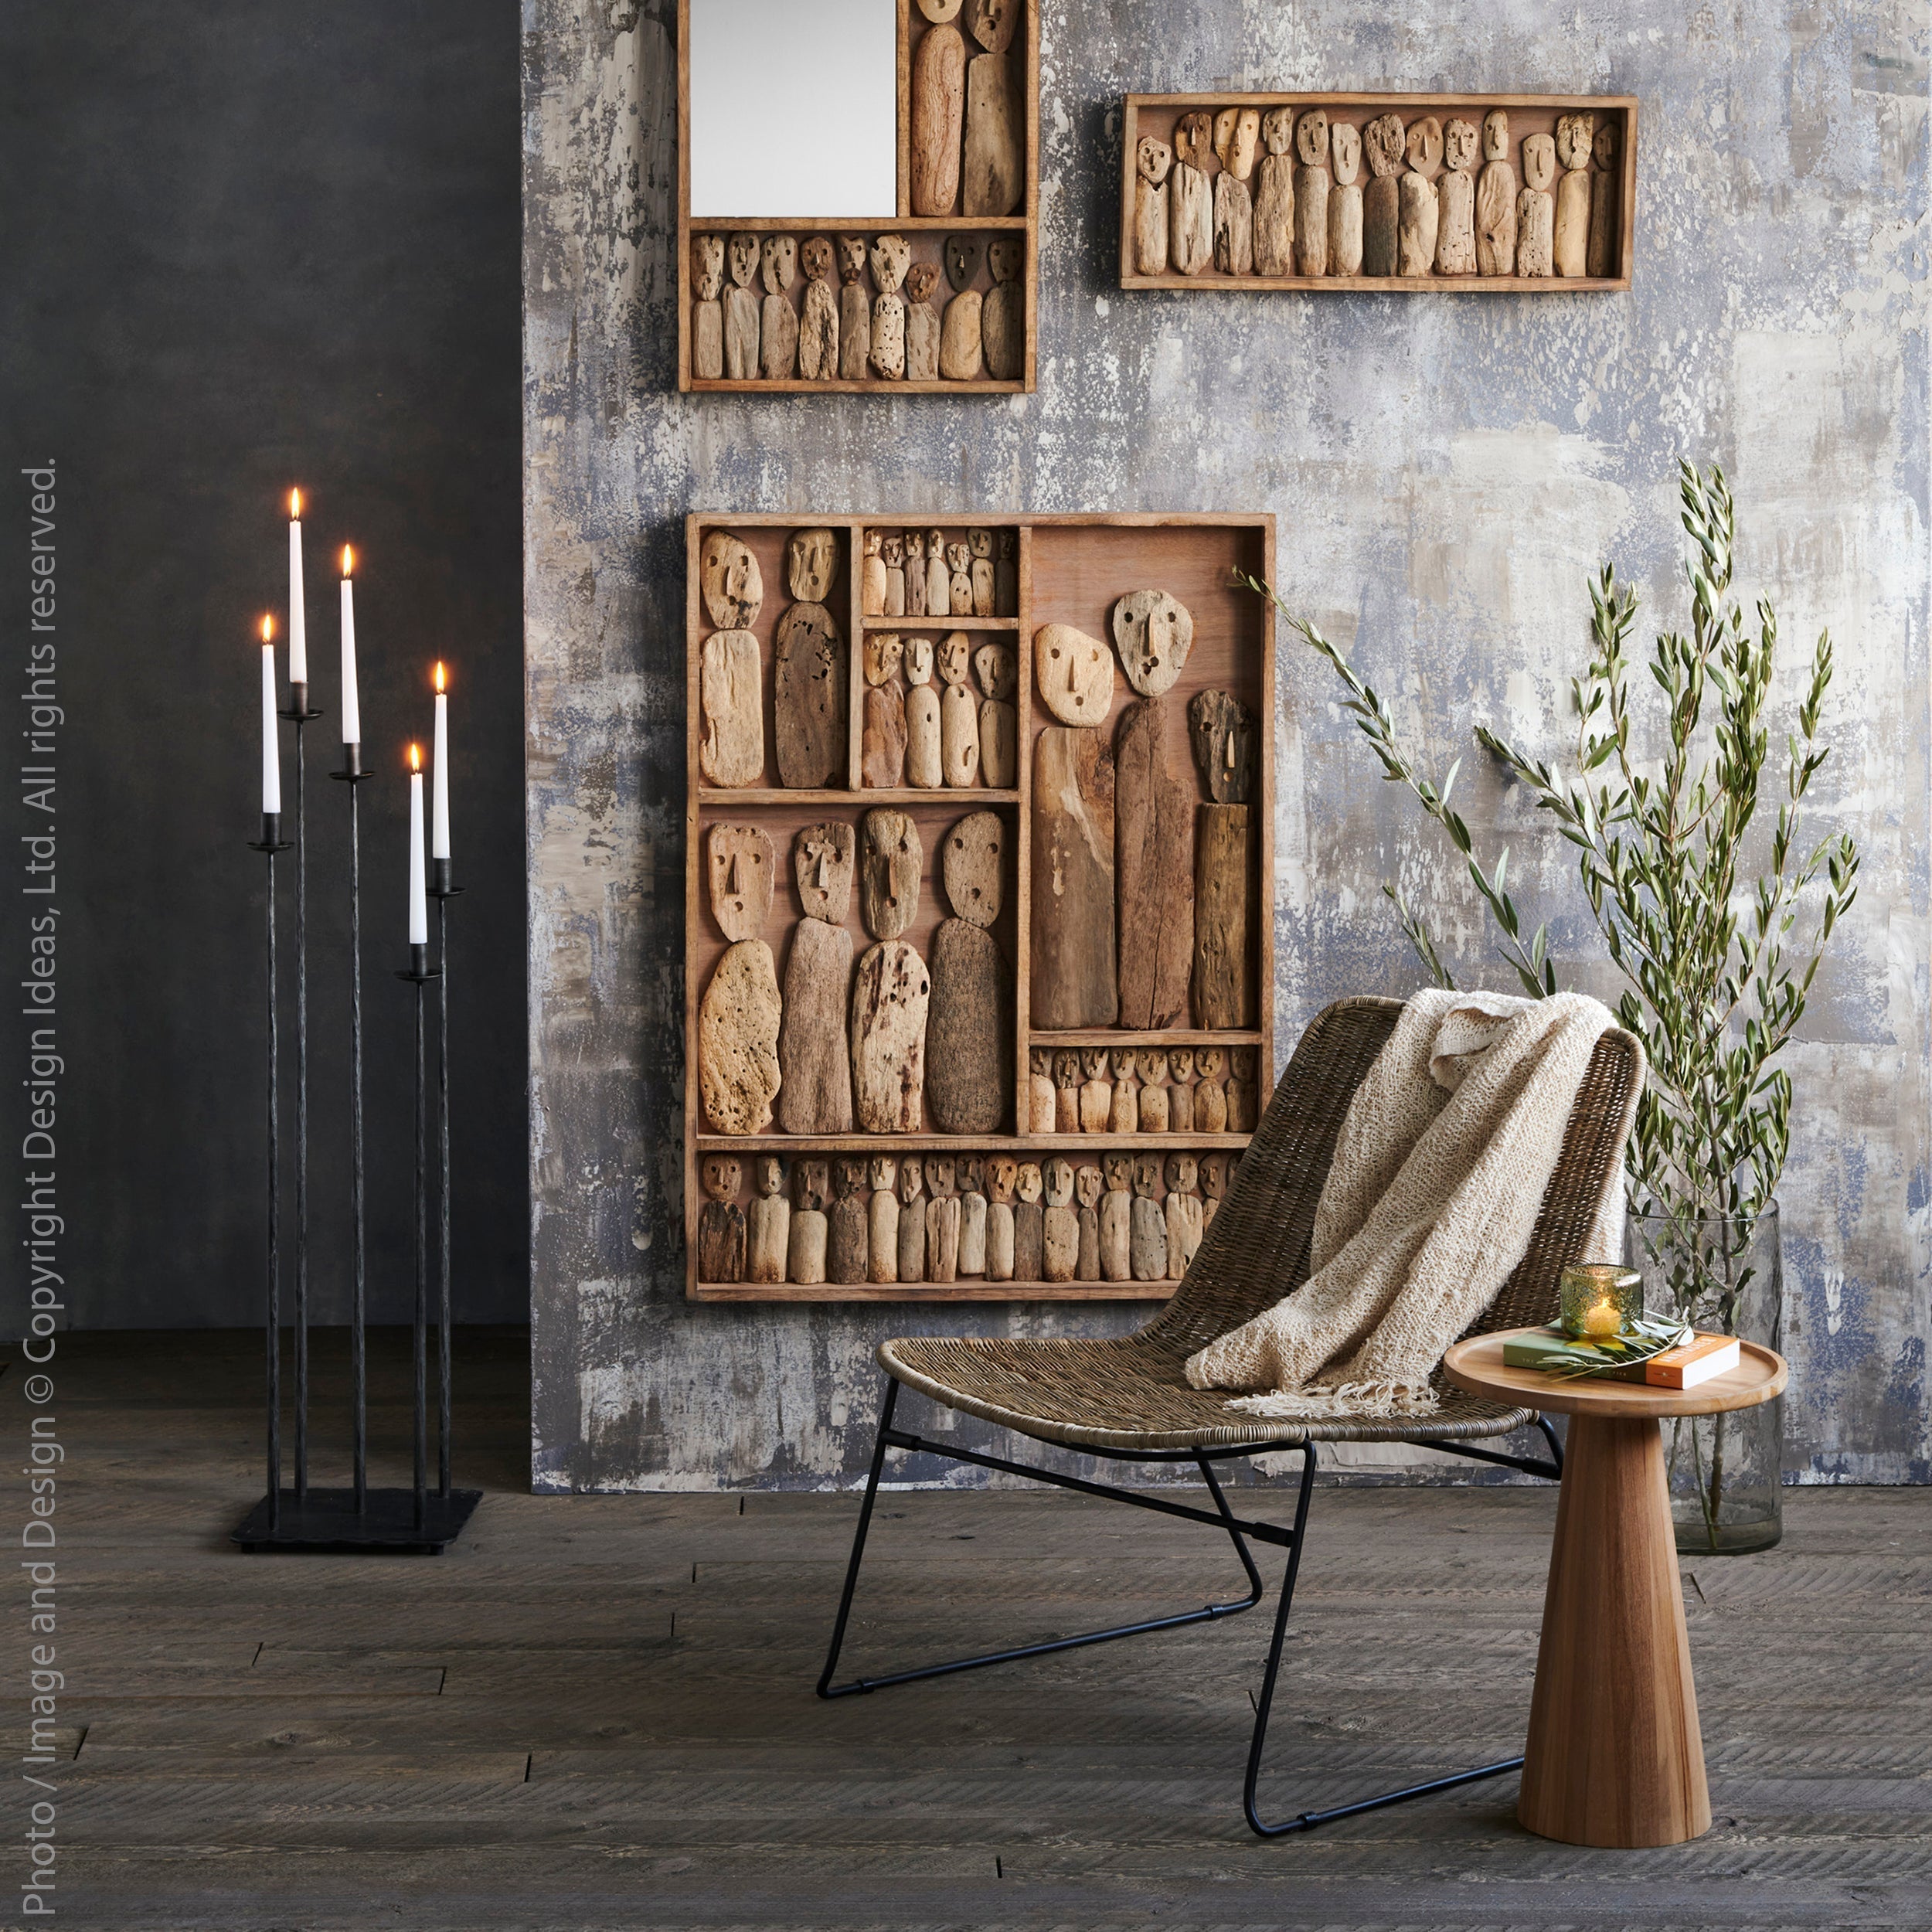 Tavu™ mirror - Natural | Image 2 | Premium Mirror from the Tavu collection | made with Recycled wood for long lasting use | sustainably sourced with recycled materials | texxture